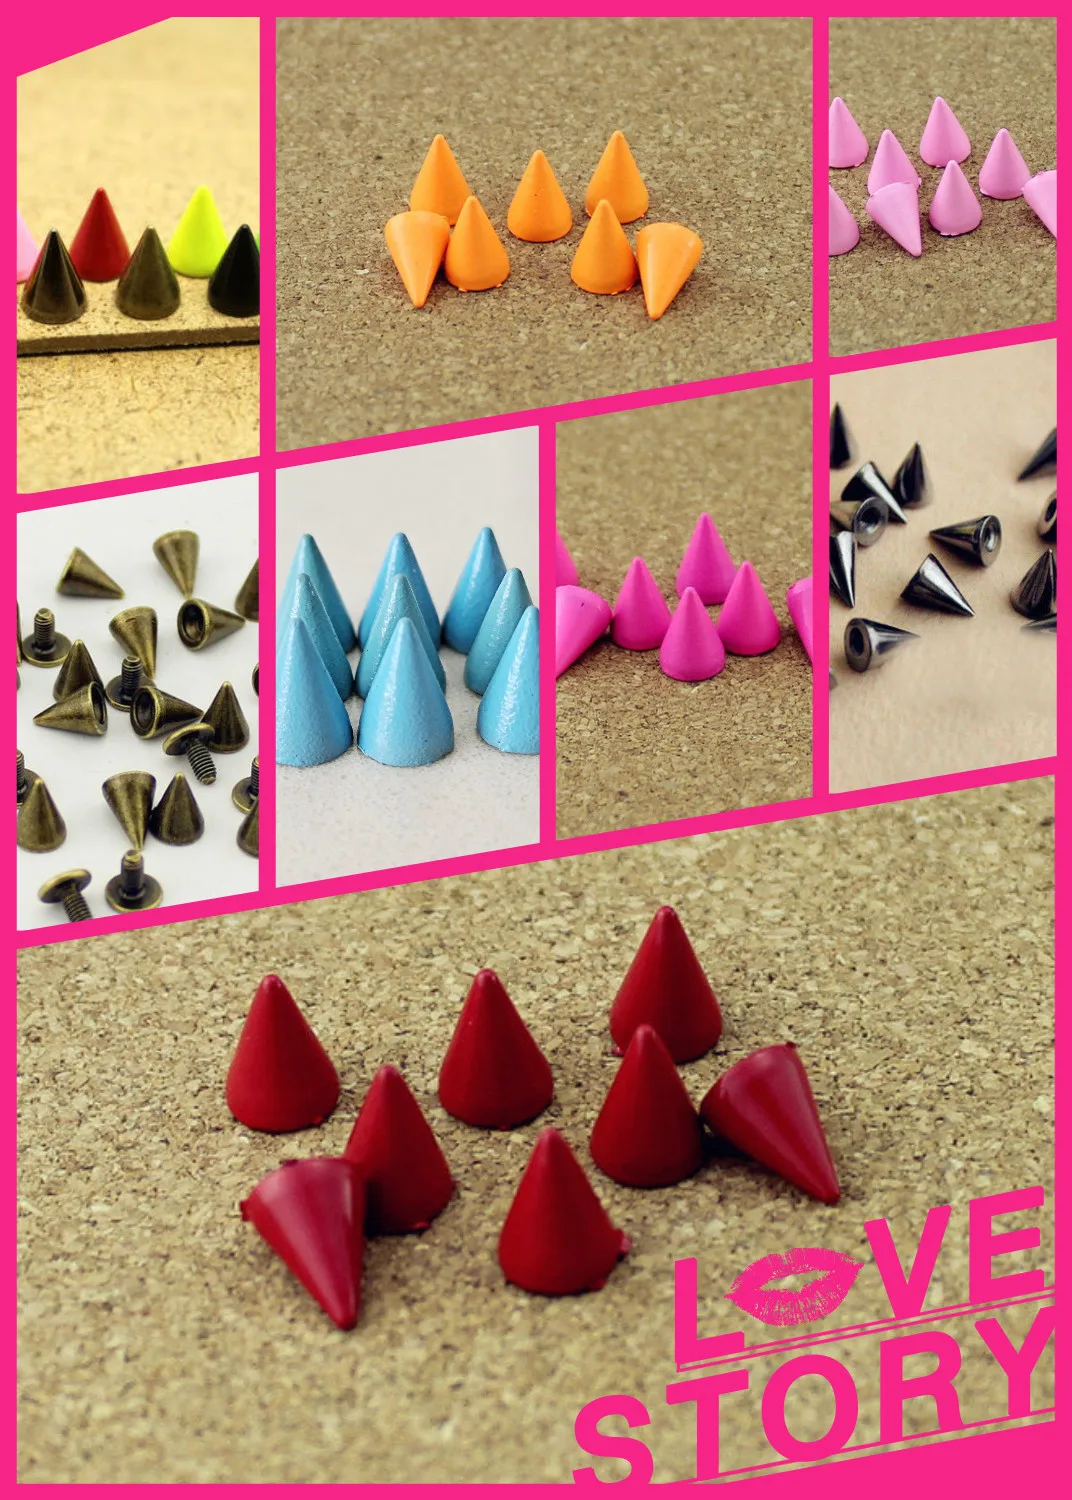 

50pcs 7*10mm Bullet Cone Colored Studs And Spikes For Clothes DIY Handcraft Garment Rivets For Leather Bag Shoes tachuelas ropa